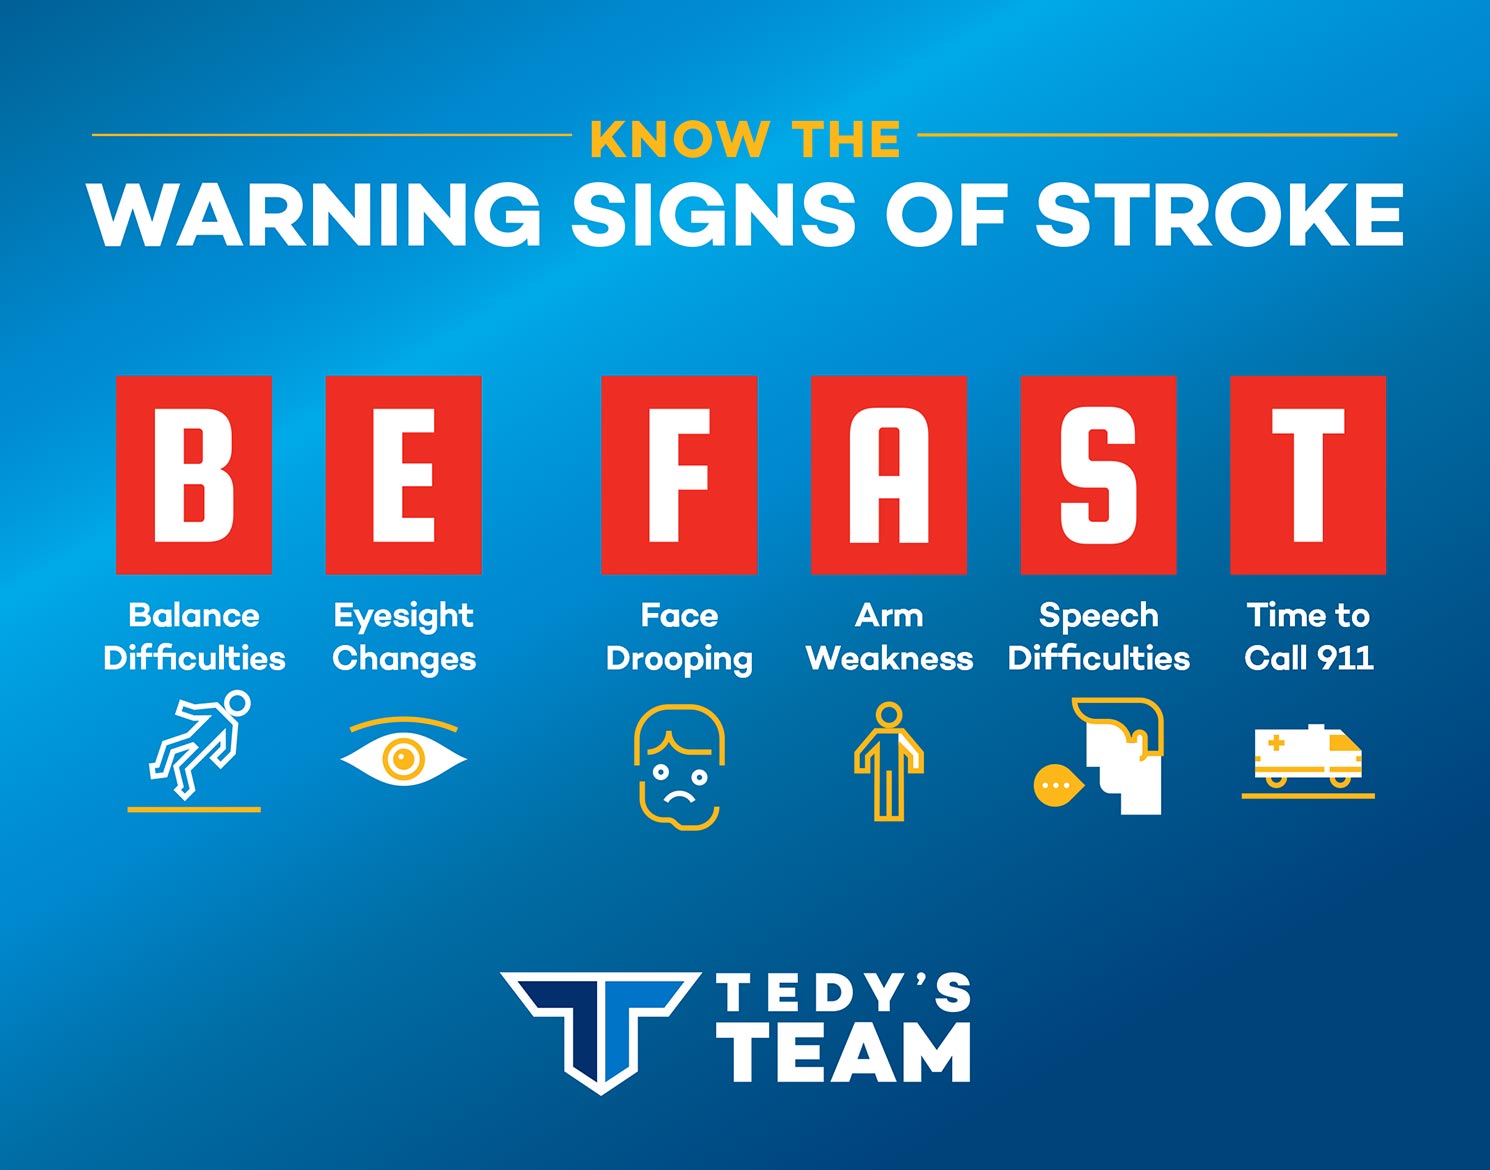 Jackrabbit philanthropy example for Tedy's Team: Be Fast graphic